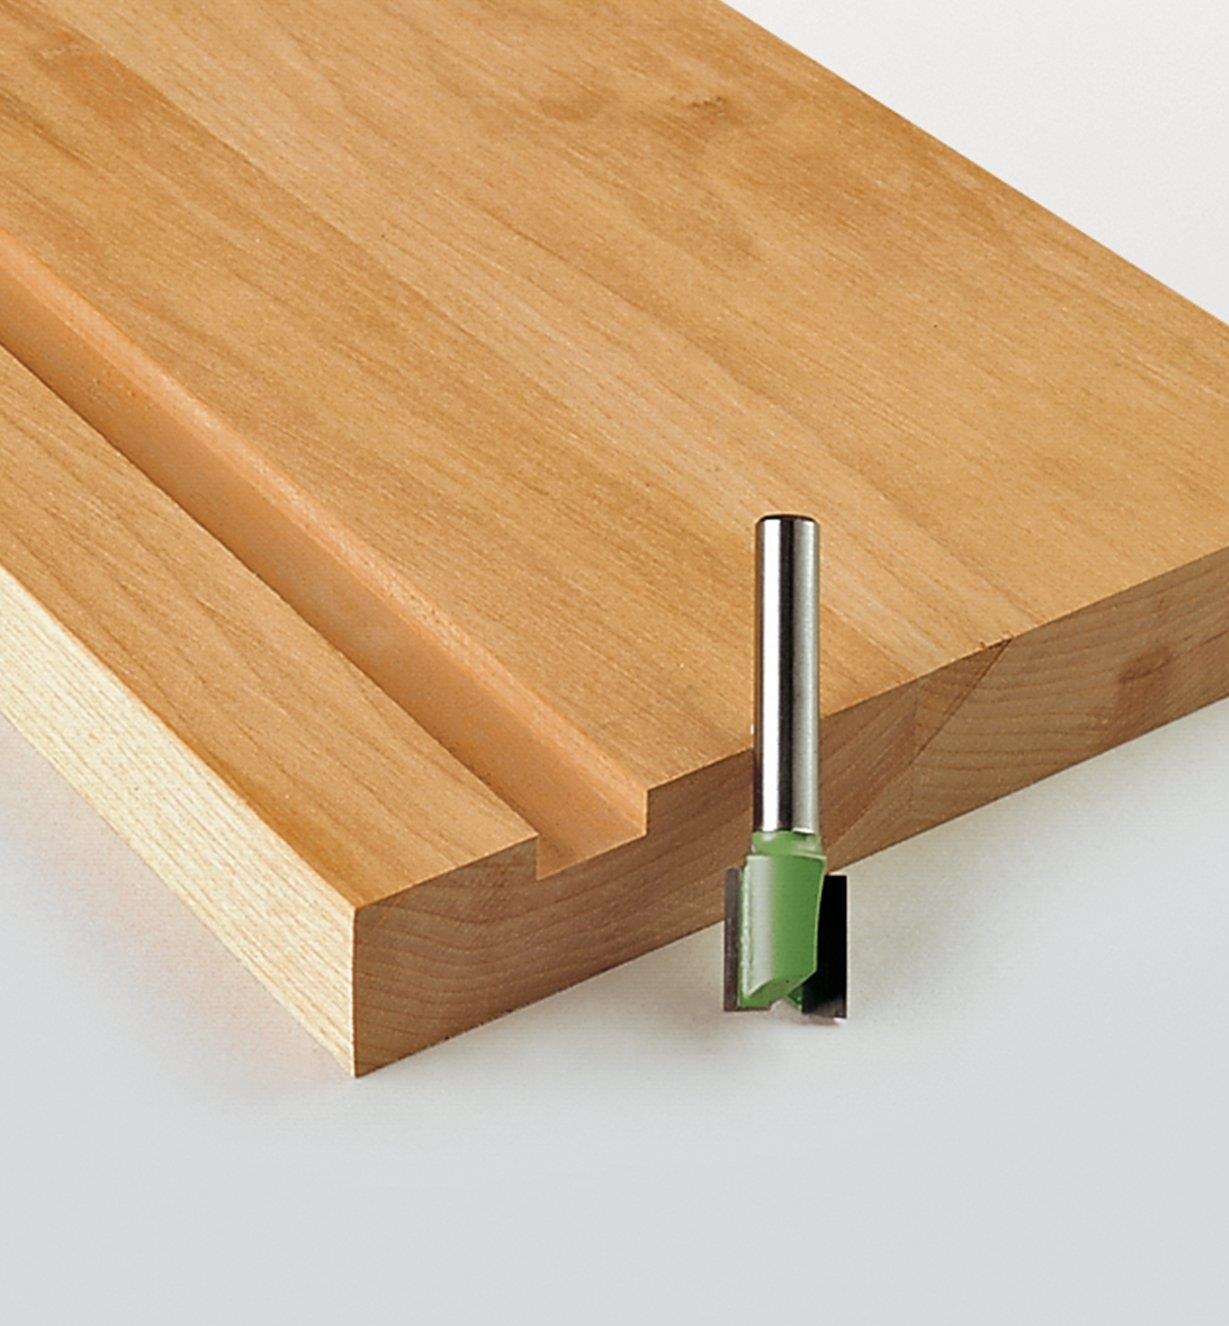 Hinge Mortising Bit next to a board with a groove cut into it